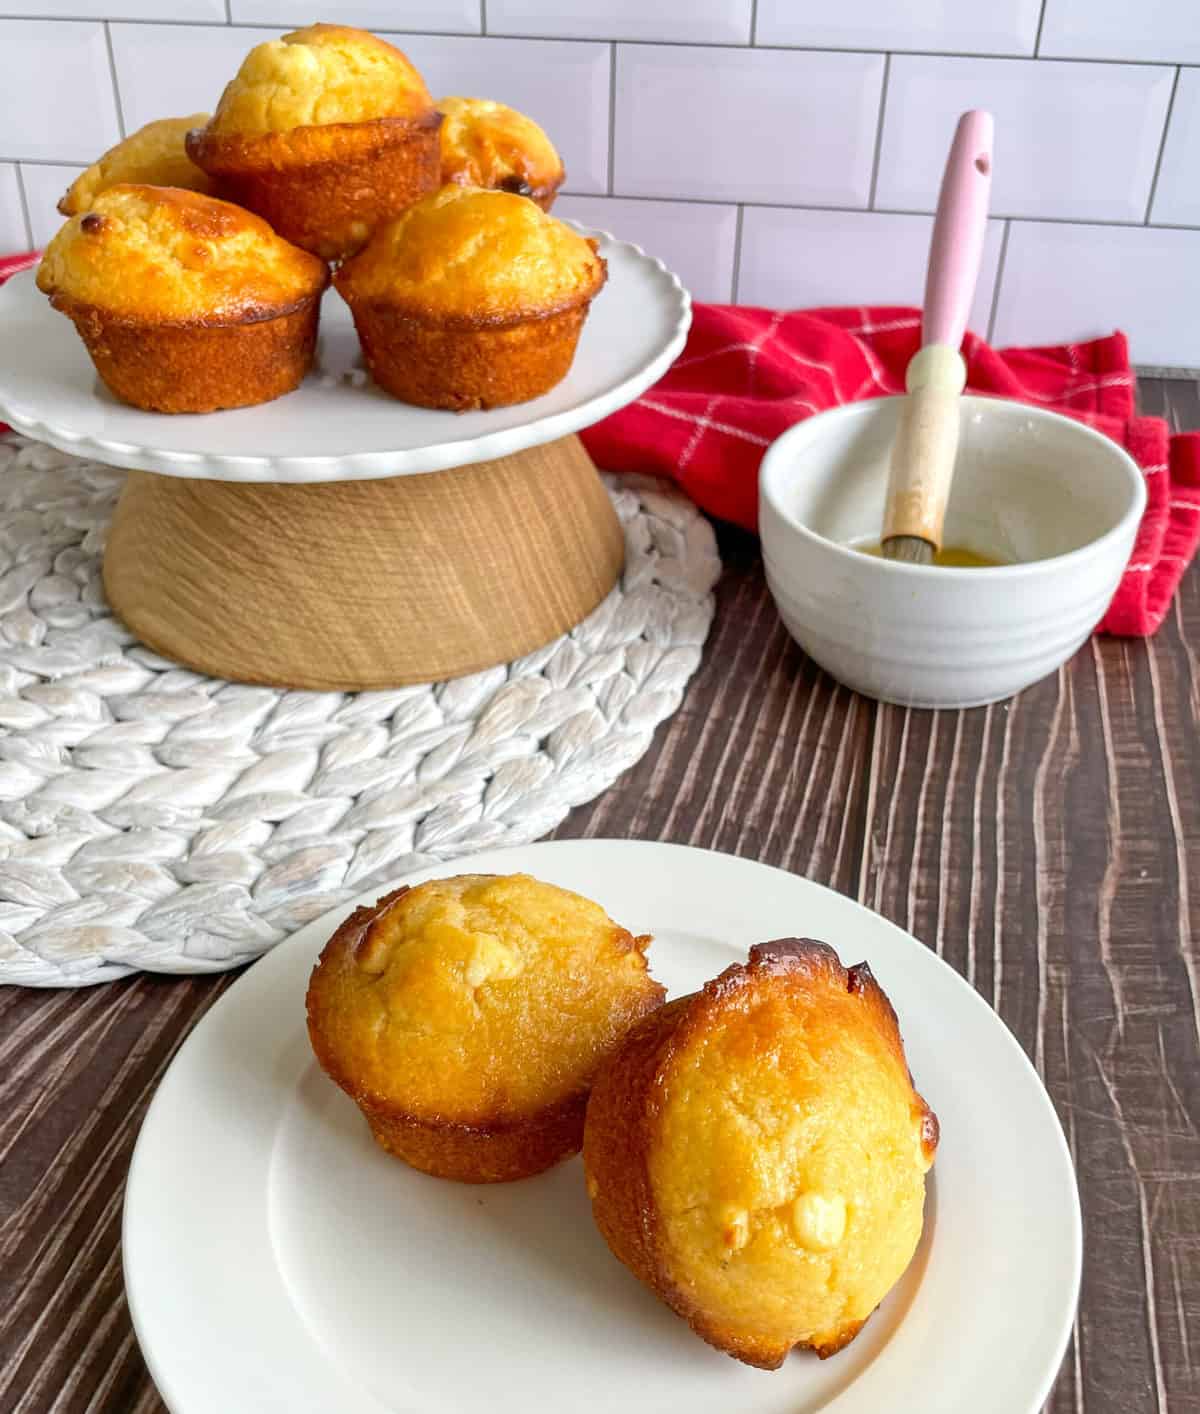 Passionfruit Muffins with bowl of syrup and pastry brush on white plates. 